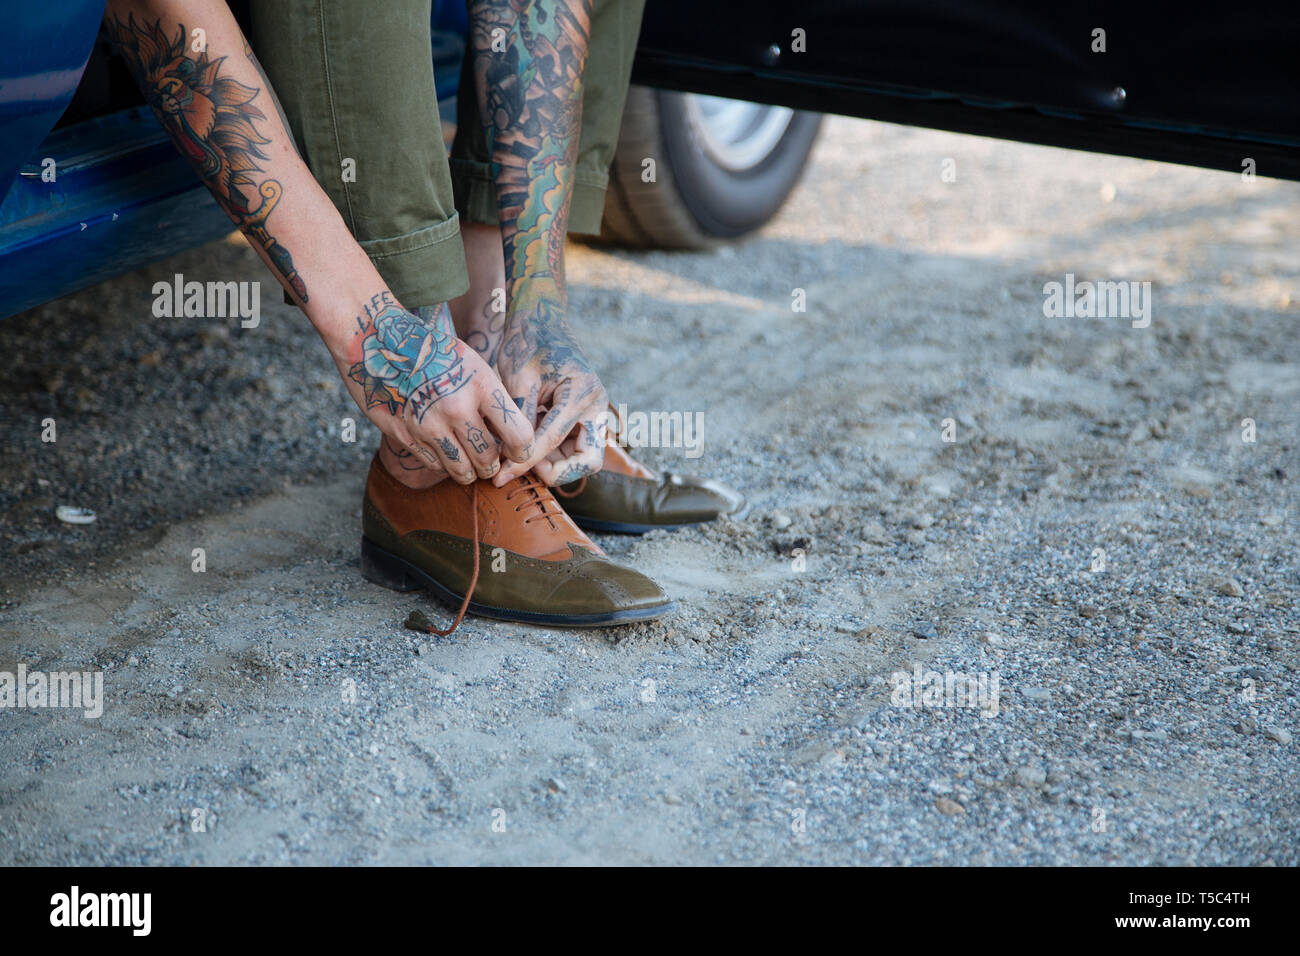 Chaussures de liage, Tatted mains Banque D'Images